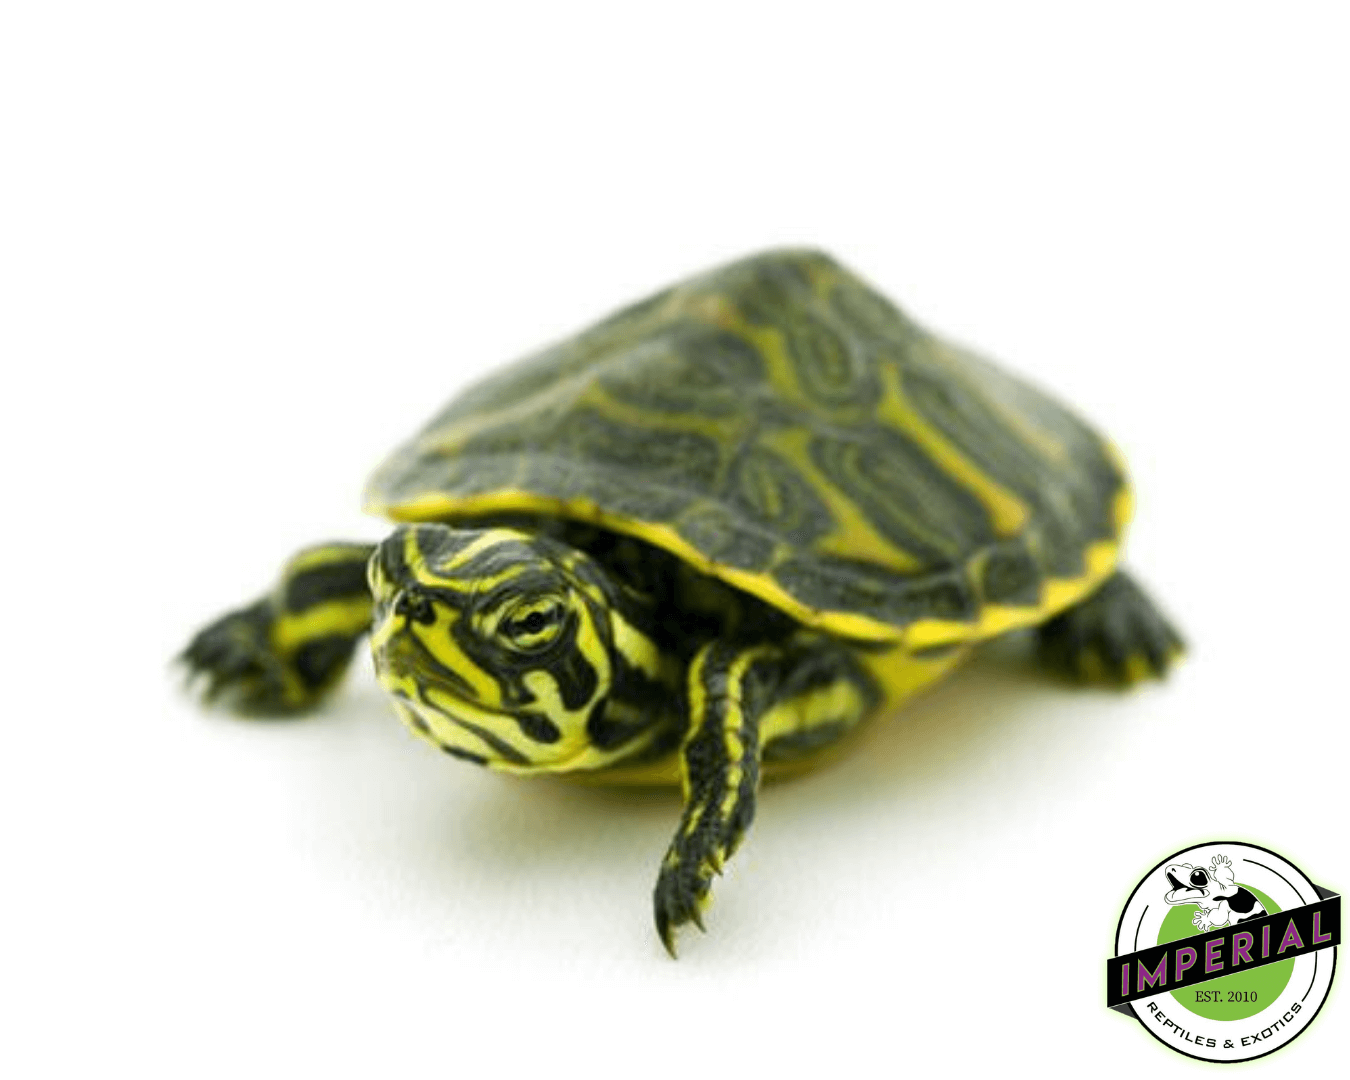 Peninsula cooter slider turtle for sale, buy reptiles online